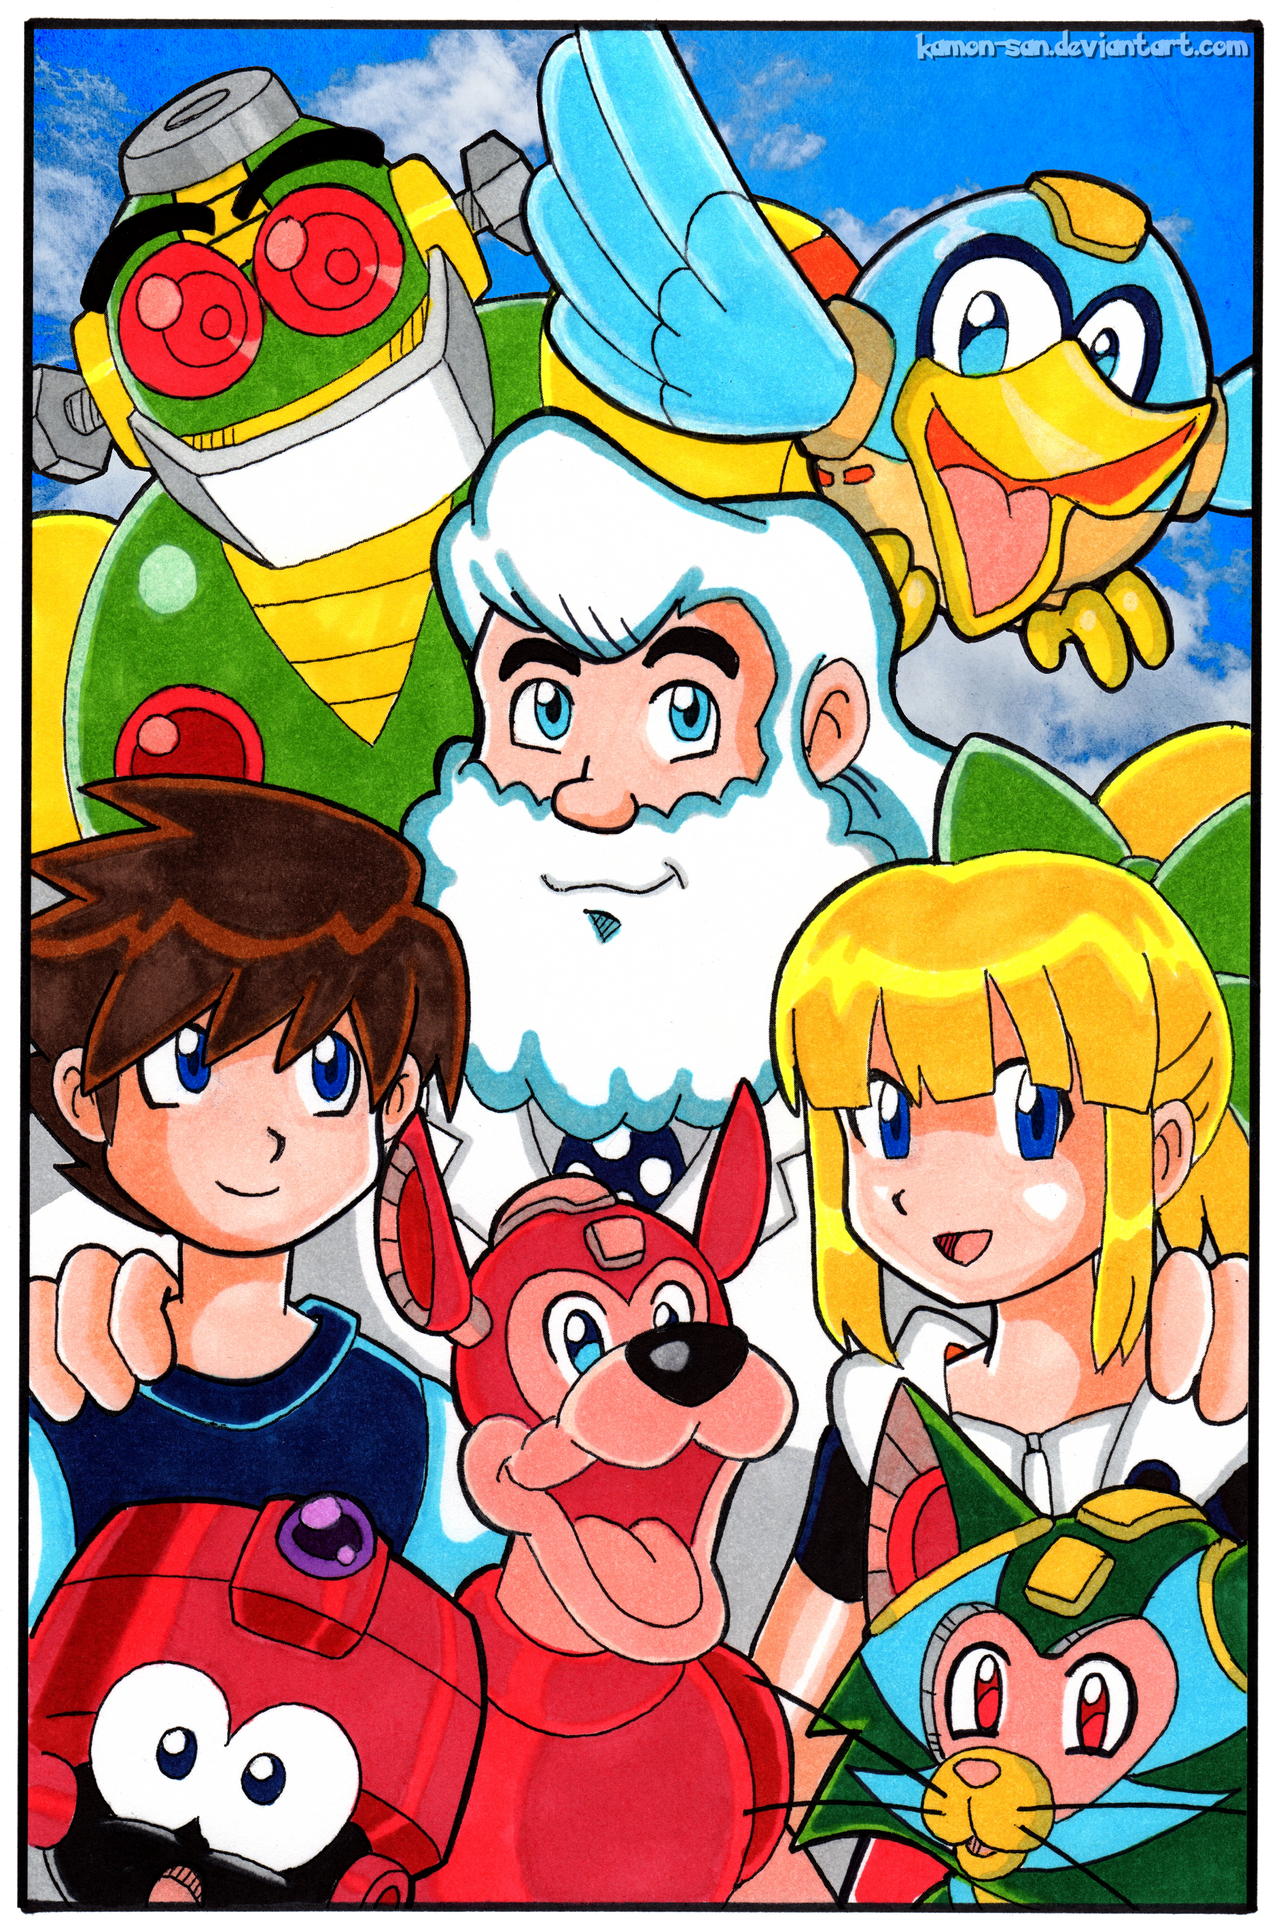 Megaman - Blues and Roll by SailorAnime on DeviantArt